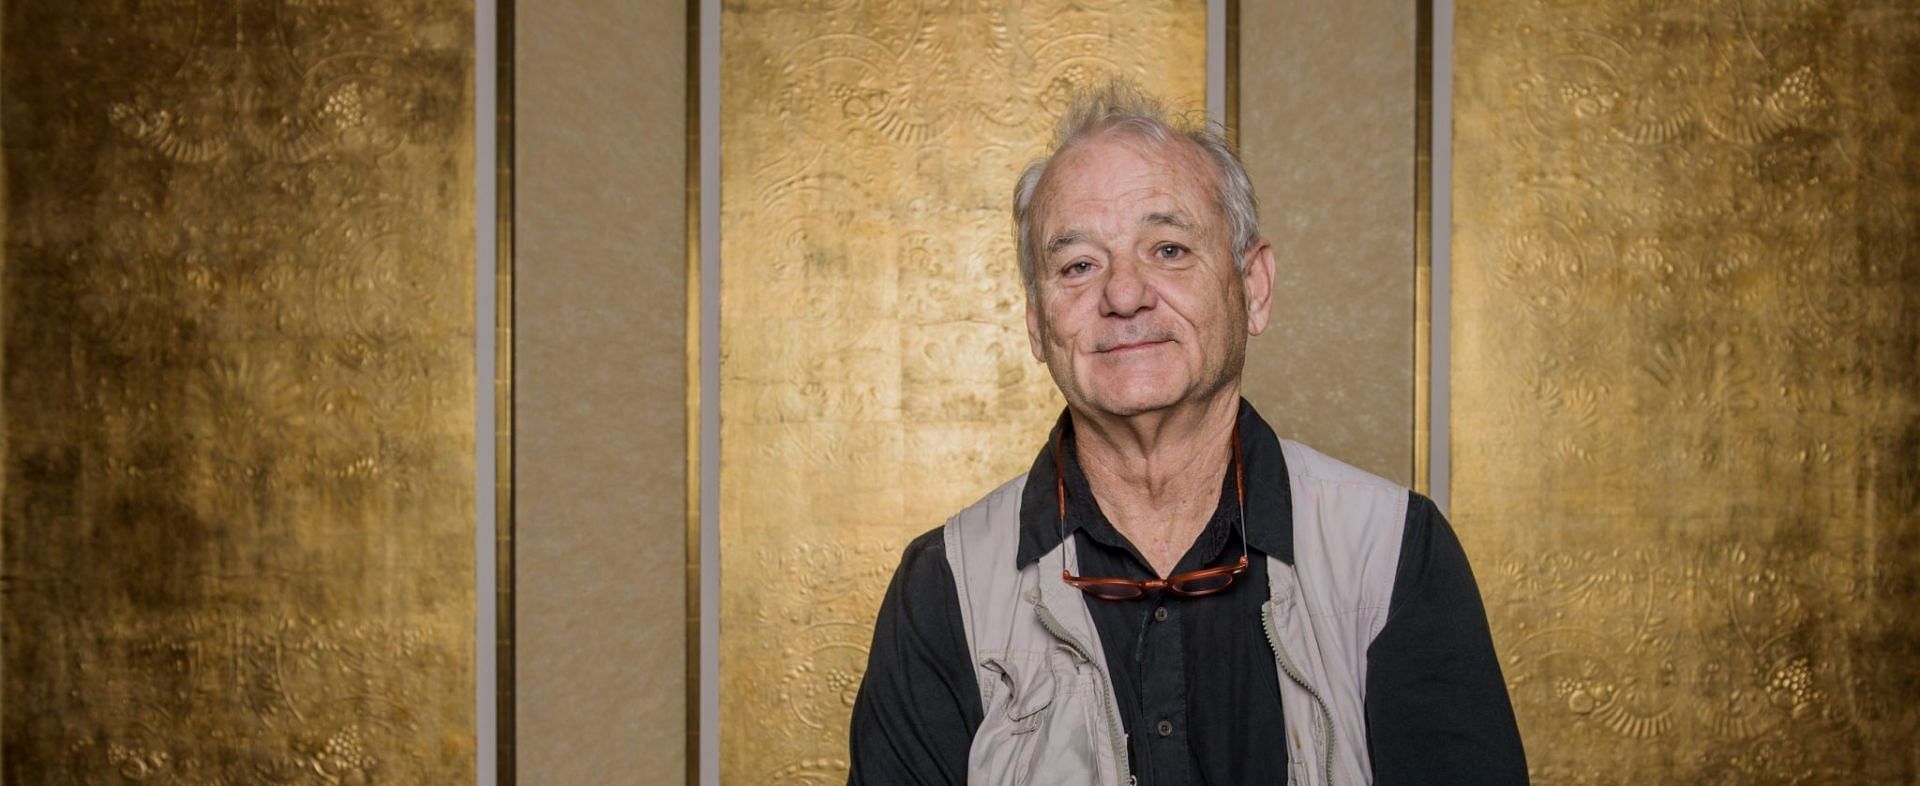 Netizens called out Bill Murray over lates inappropriate behavior allegations (Image via Getty Images)